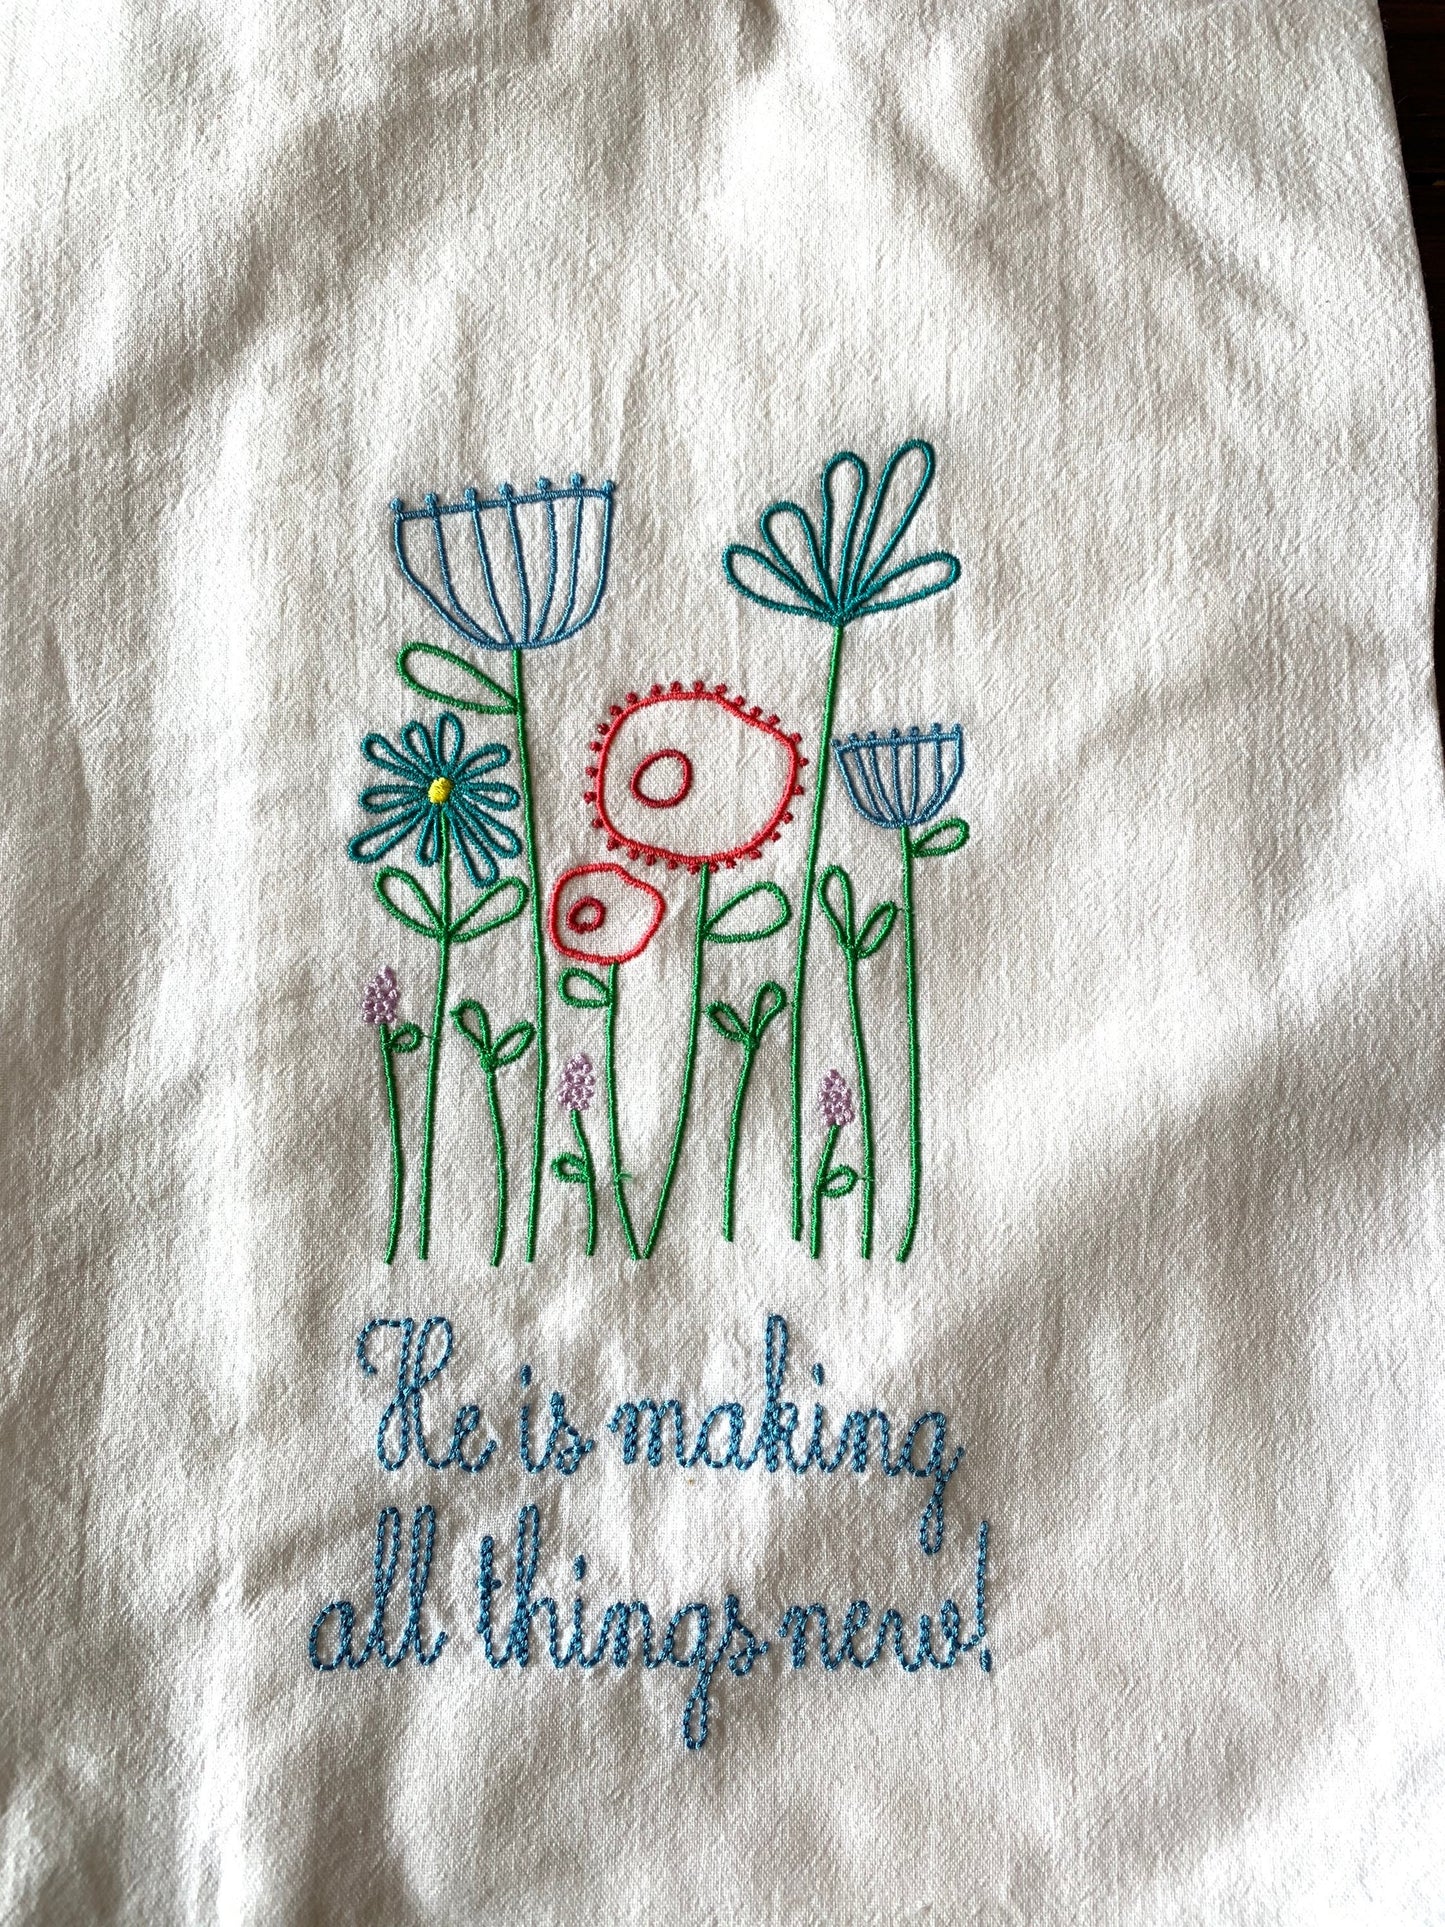 All Things New Floral Hand Towel - flour sack towel - Spring Hand Towel - Embroidered Hand Towel